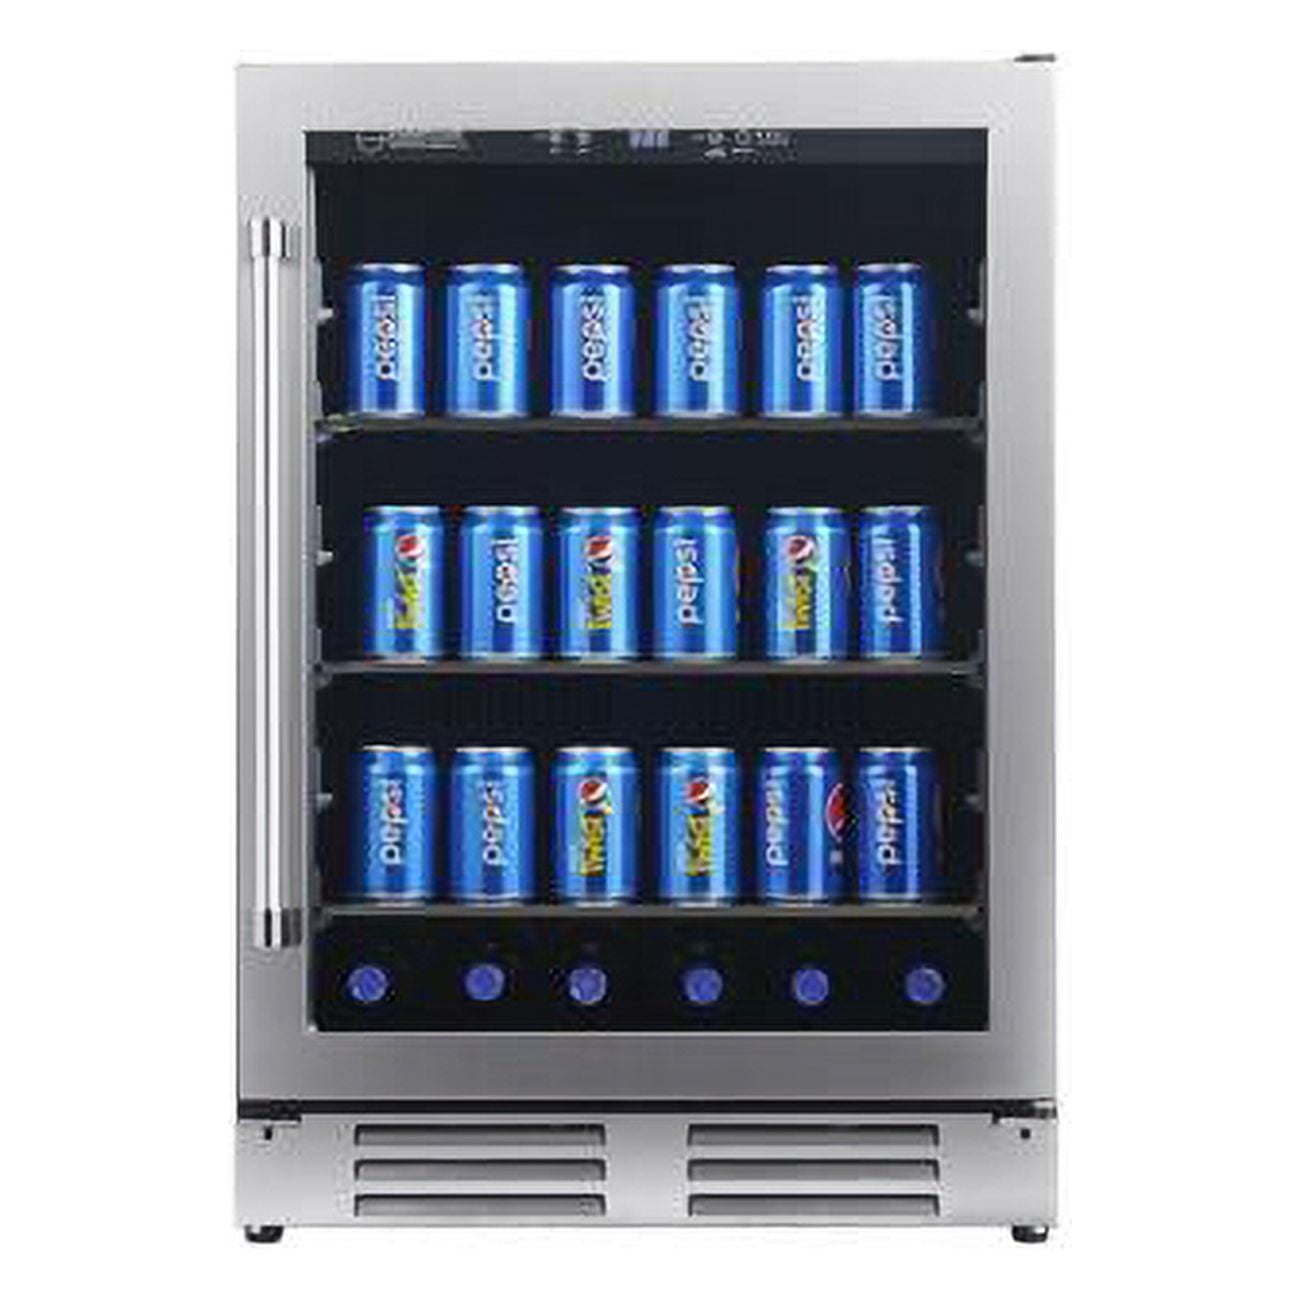 Deco Chef Beverage Bundle, 118-Can Mini Fridge with Glass Door and 40lb per Day Countertop Stainless Steel Ice Maker for Home or Office